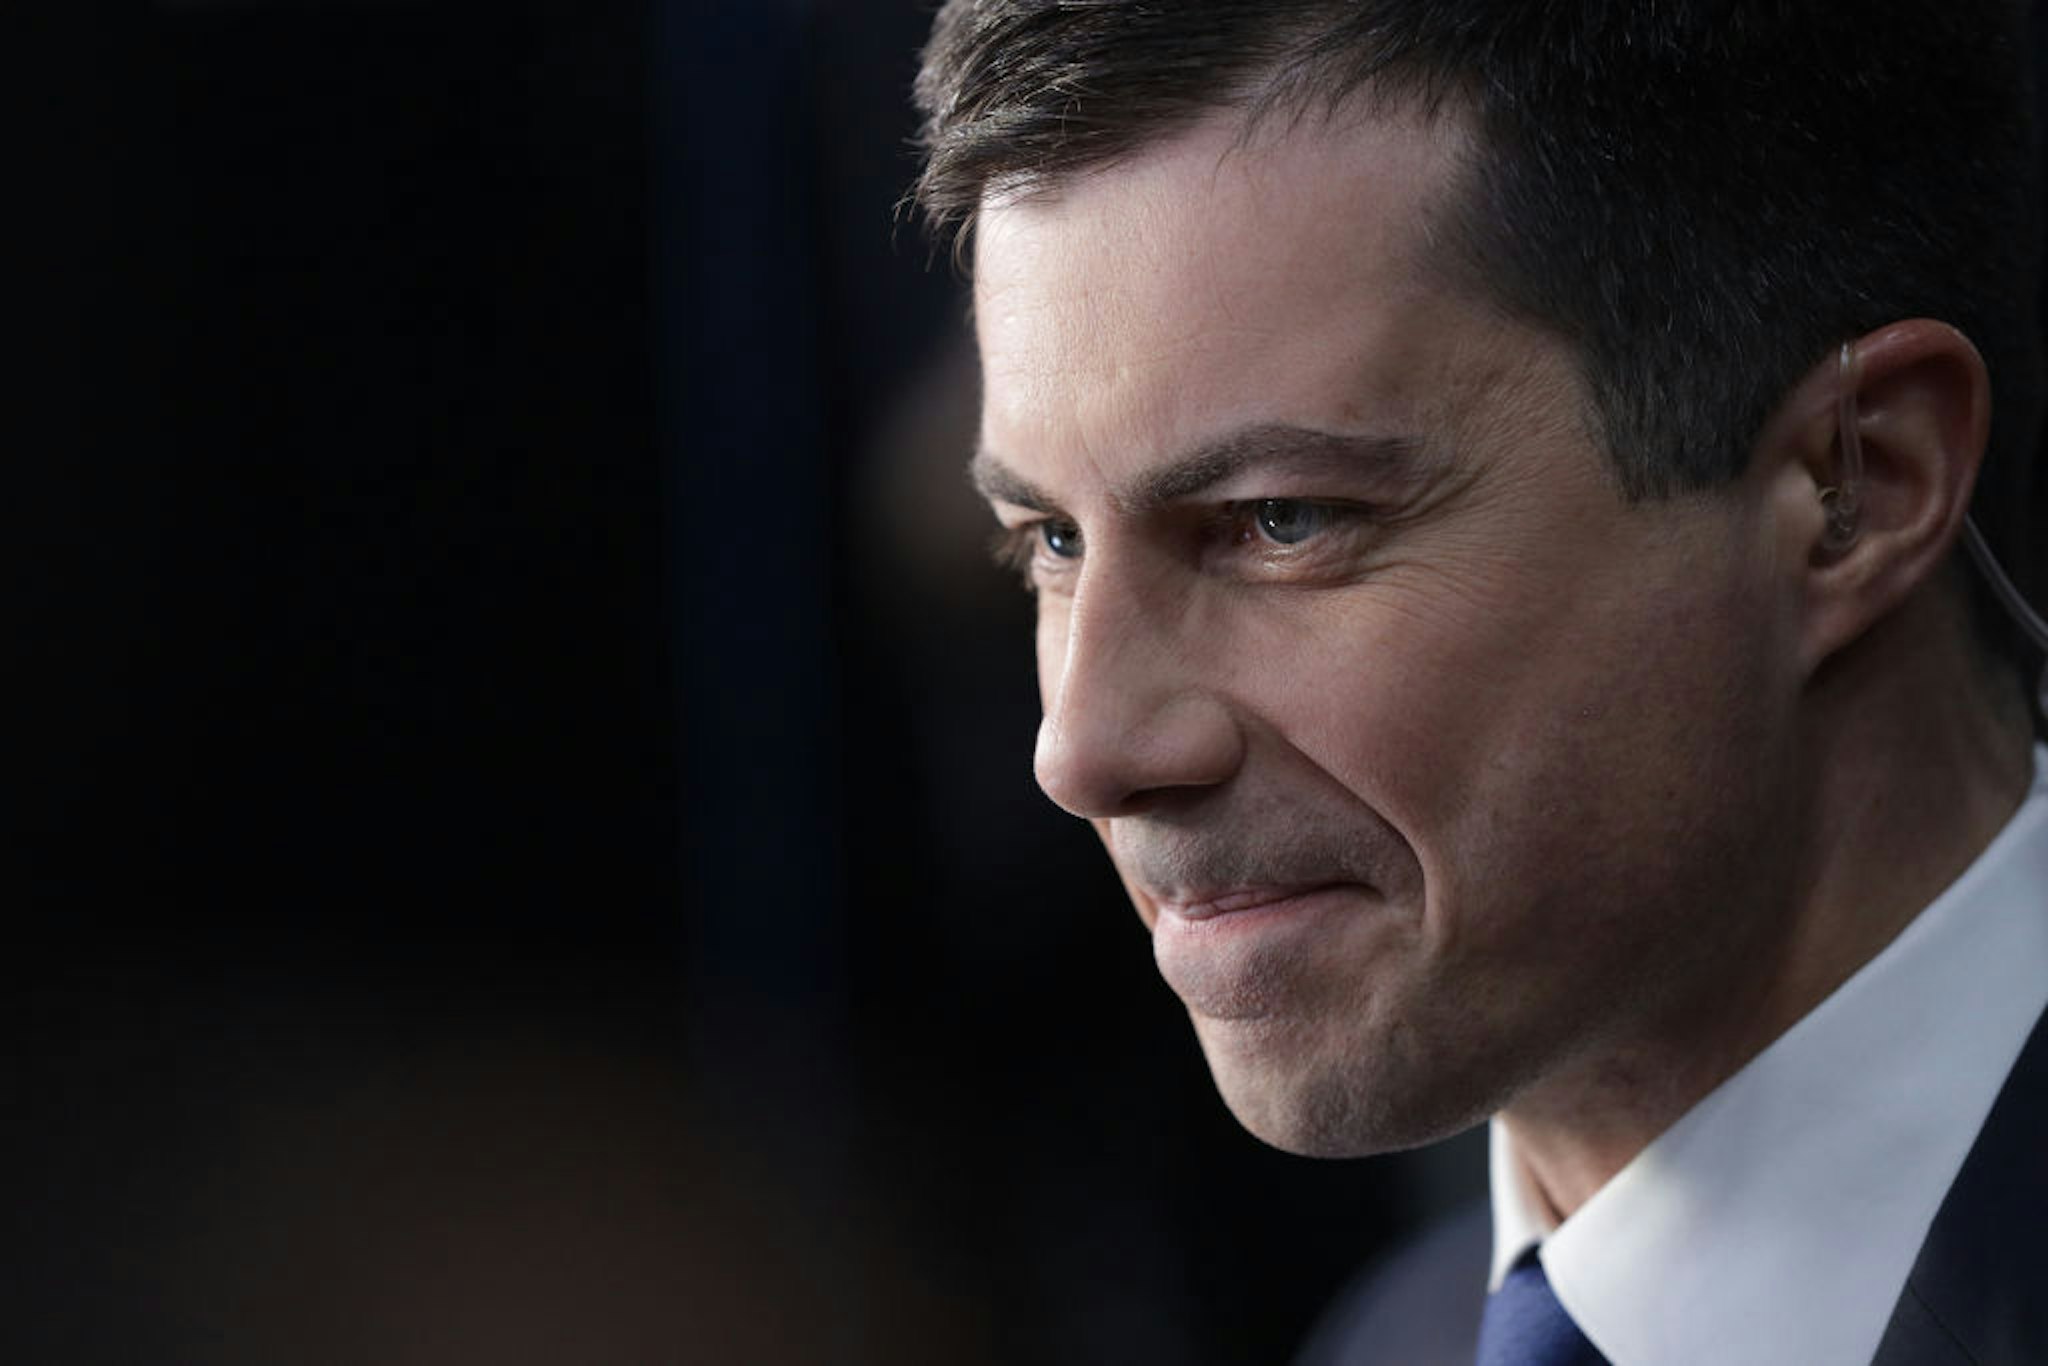 Pete Buttigieg speaks to the media after the Democratic Presidential Debate